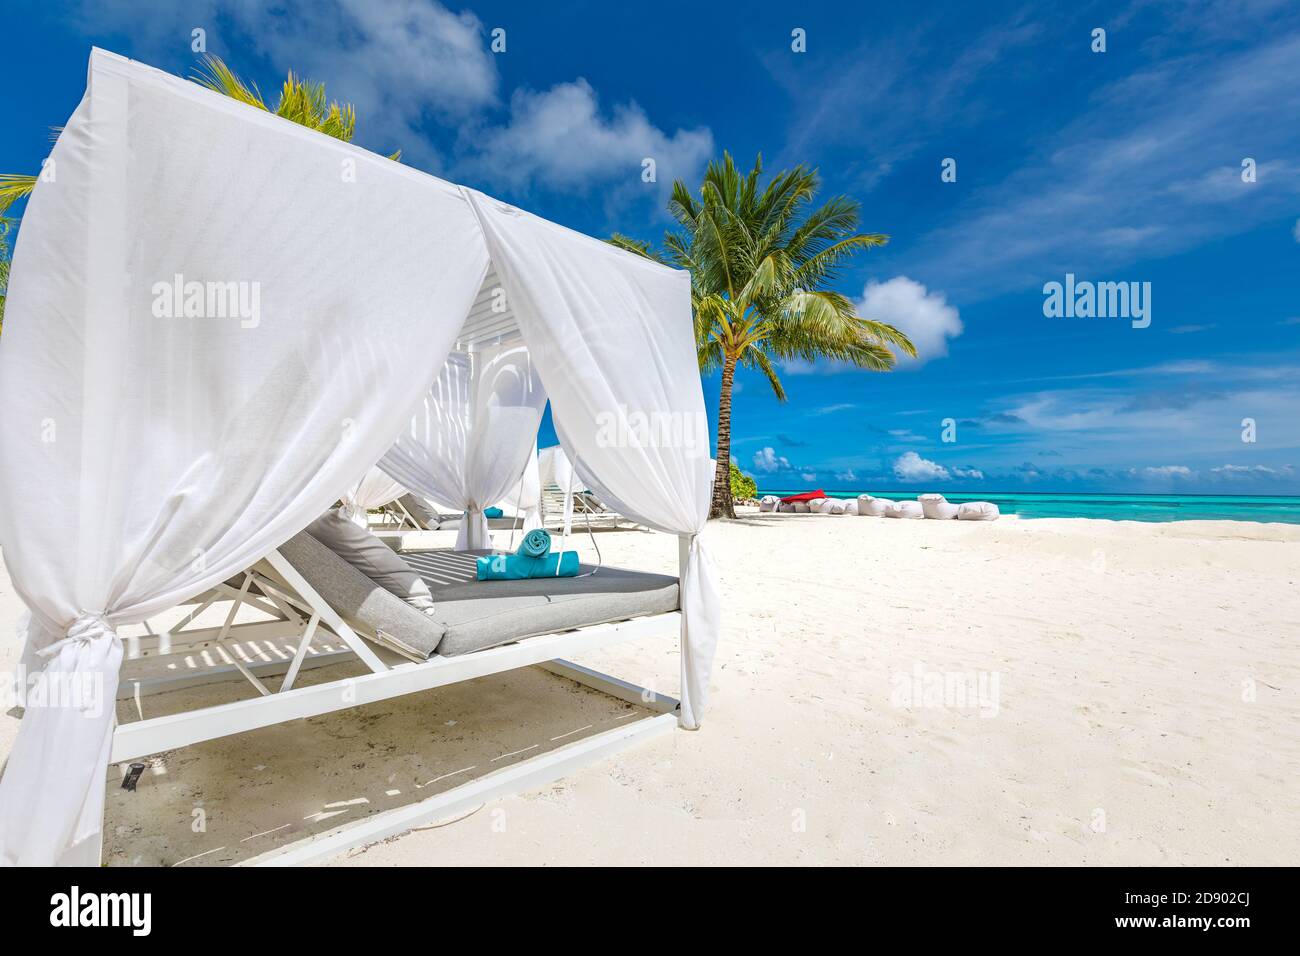 Amazing tropical beach scene with white canopy and curtain for luxury summer relaxation concept. Blue sky with white sand for sunny beach landscape Stock Photo